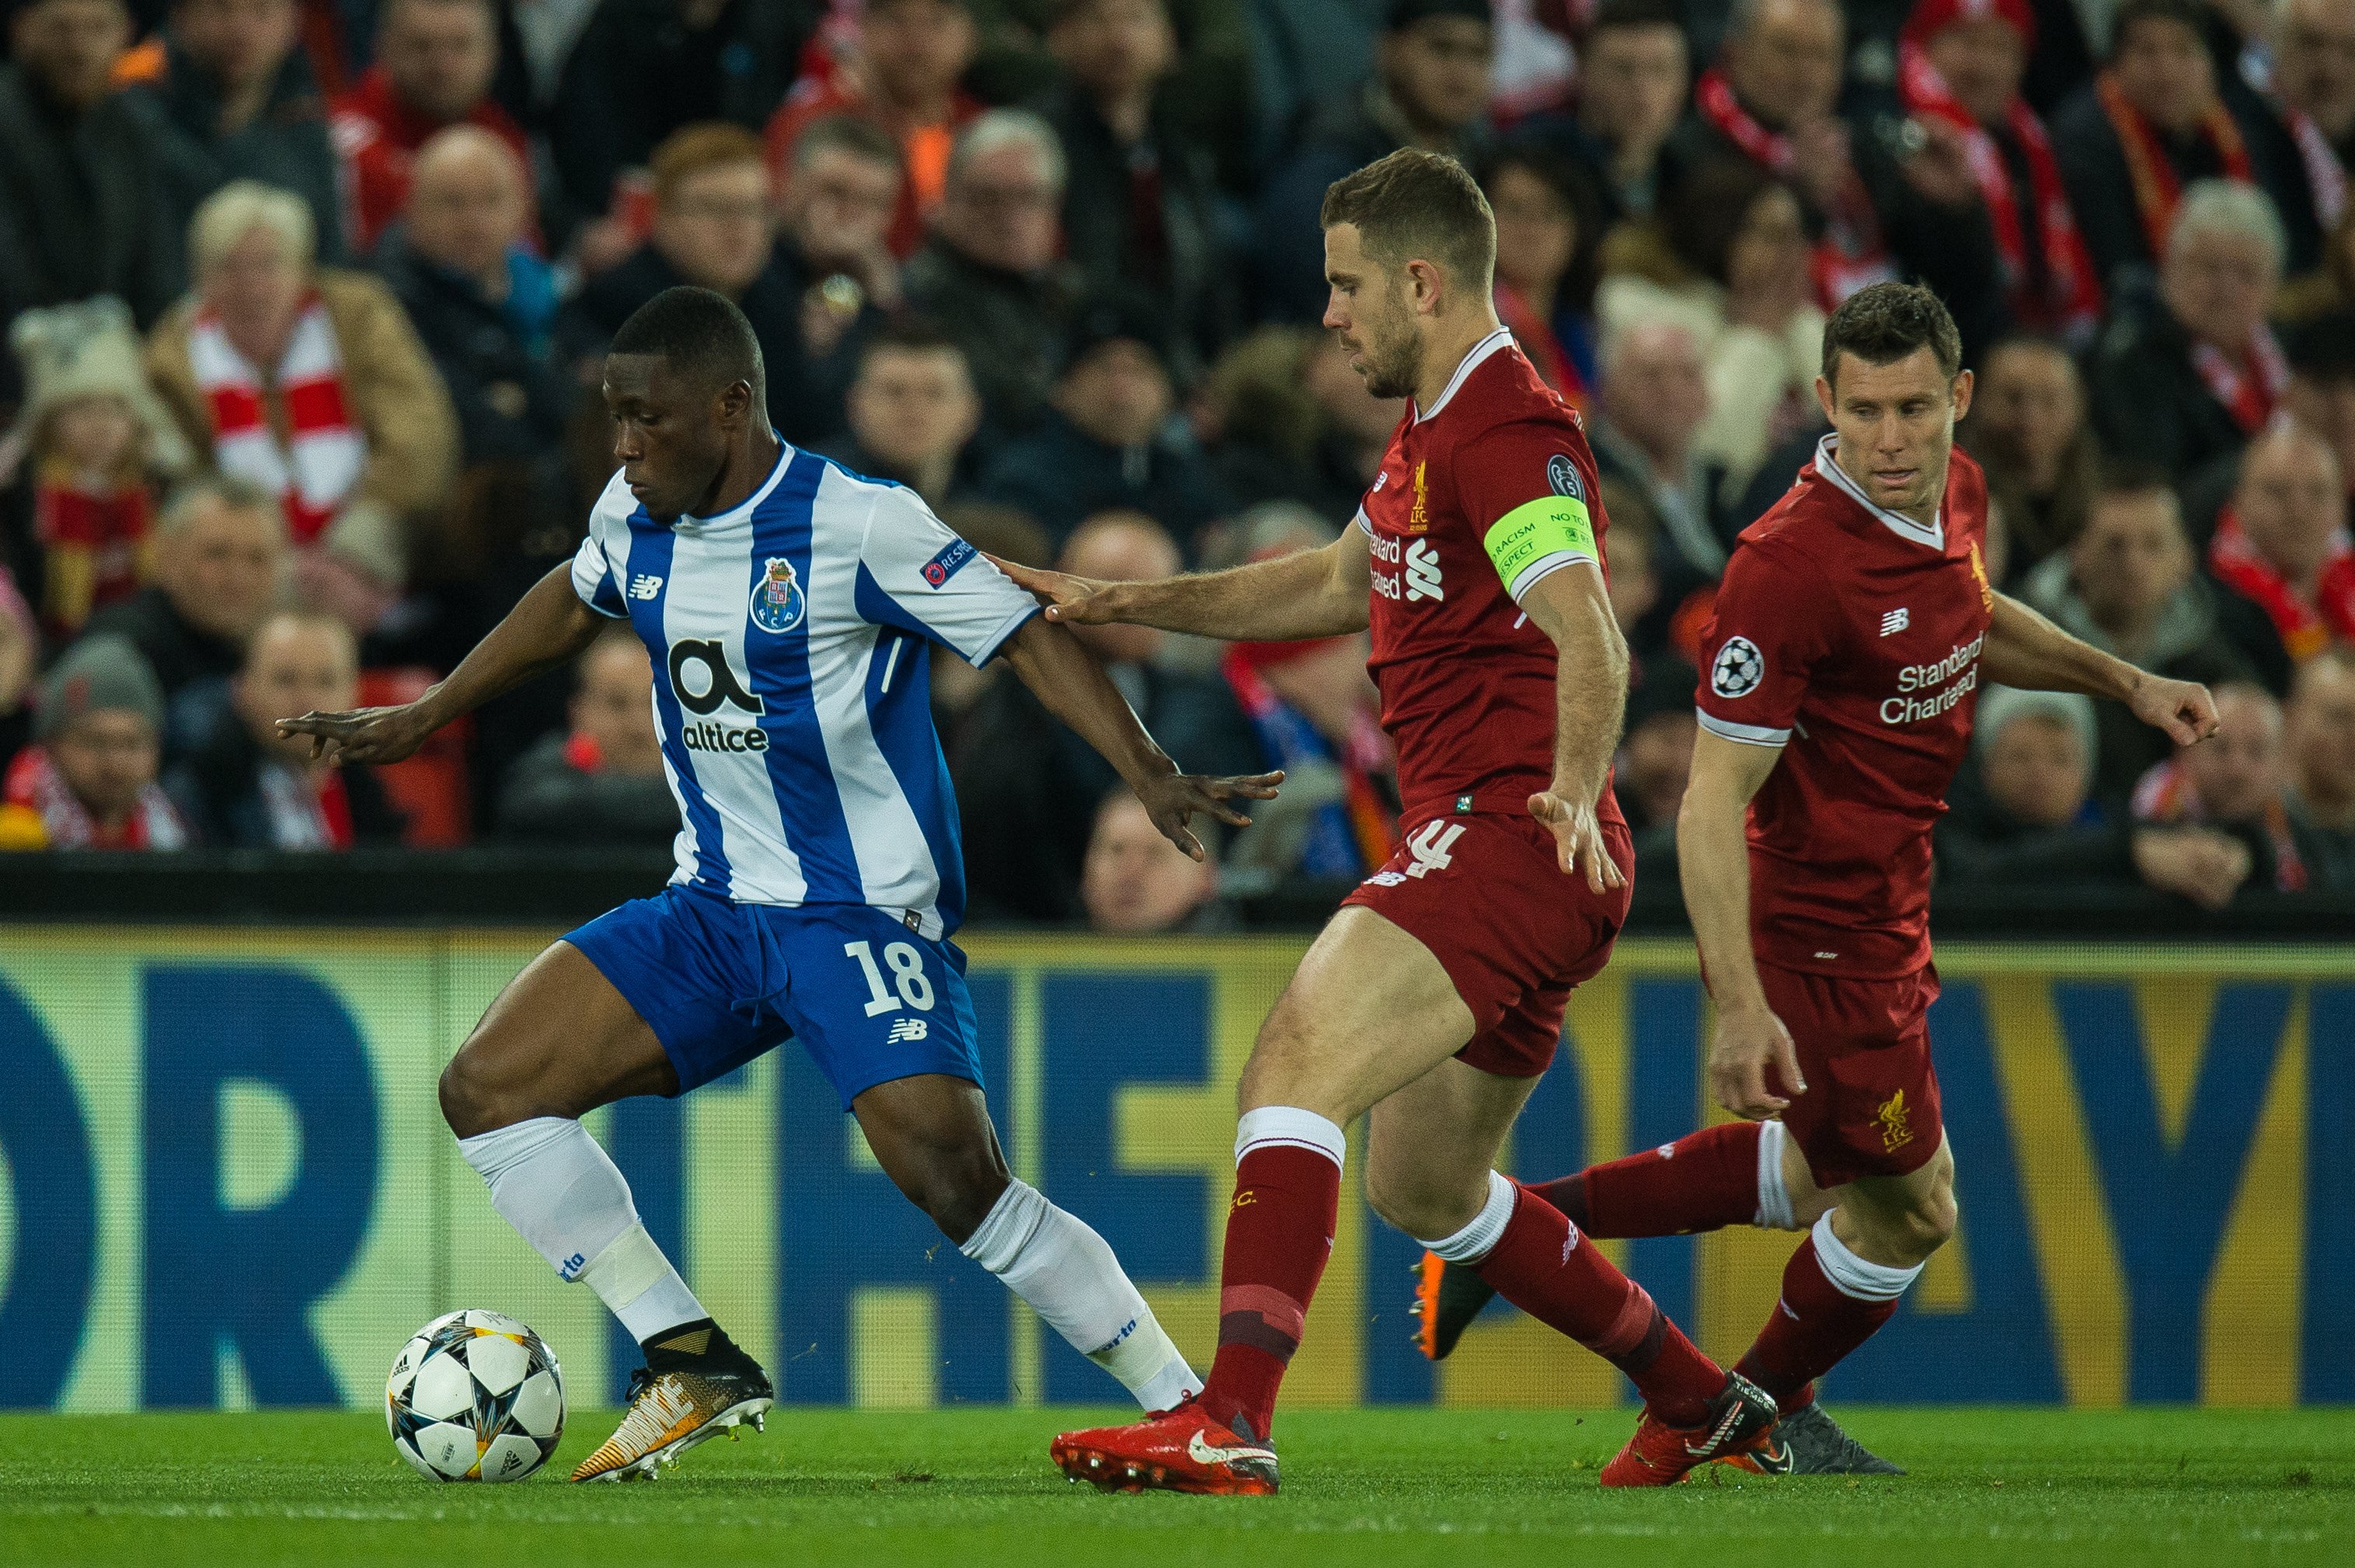 epa06585389 Waris Majeed of FC Porto (L) in action with Jordan Henderson of Liverpool (R)  during the UEFA Champions League round of 16 second leg soccer match between Liverpool FC and FC Porto in Liverpool, Britain, 06 March 2018.  EPA/Peter Powell